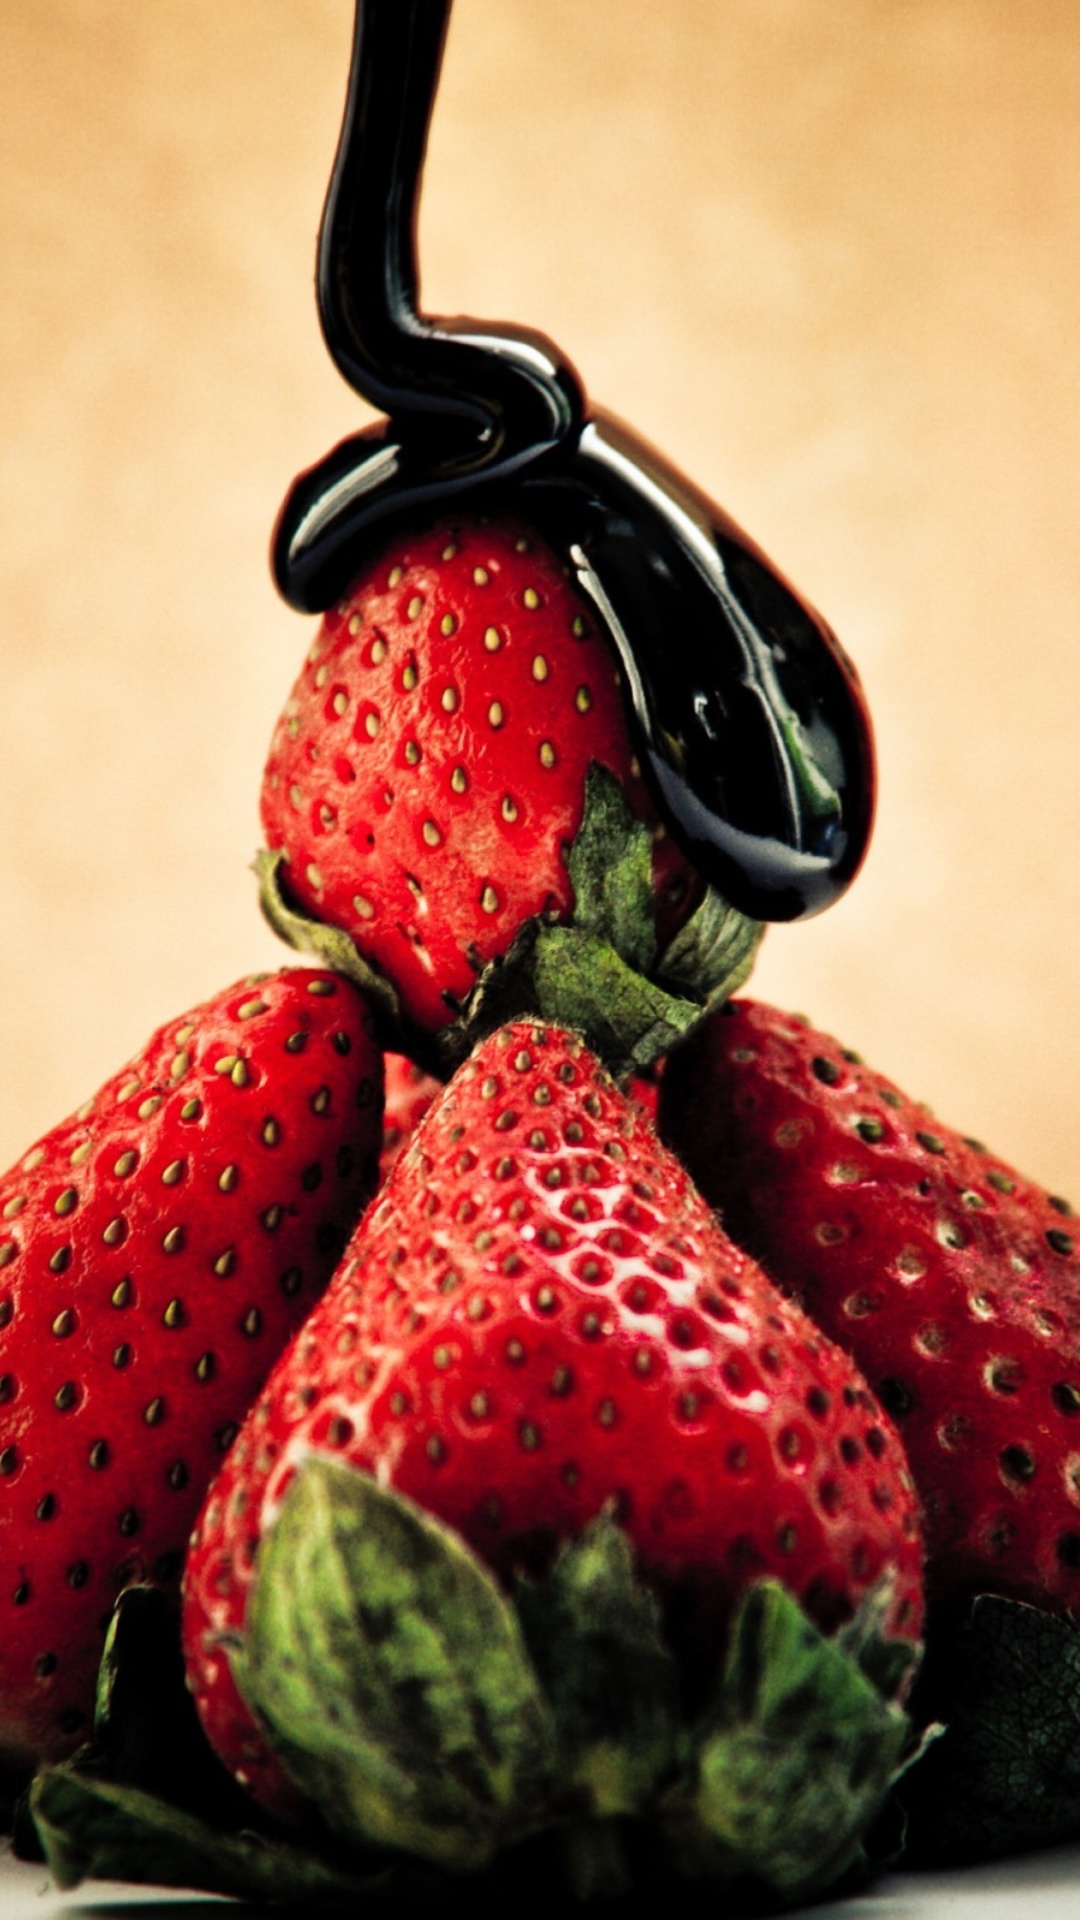 Das Strawberries with chocolate Wallpaper 1080x1920